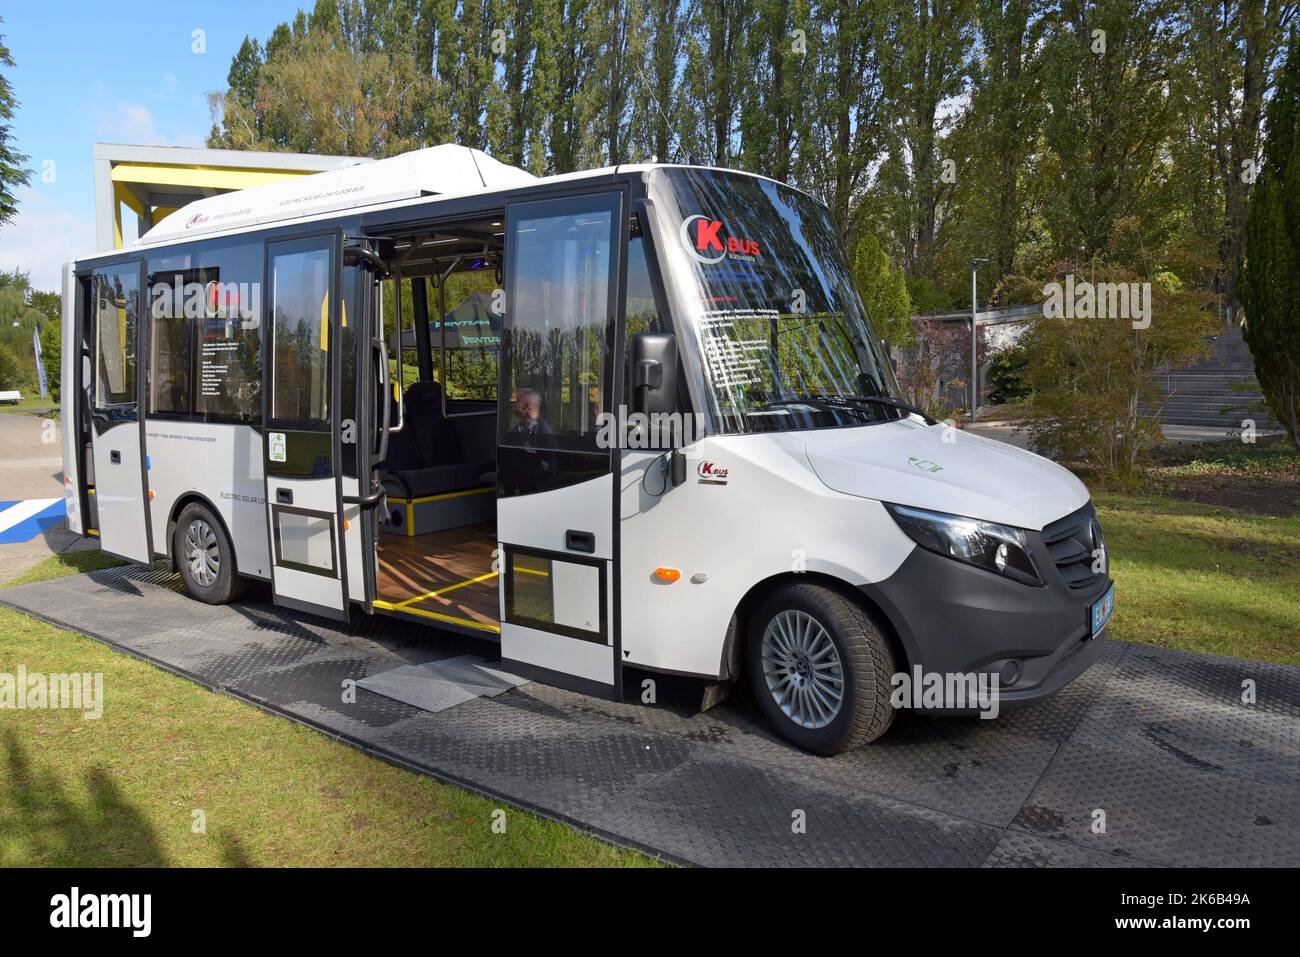 People studying the K Bus low floor emission free electric bus with solar panels at Innotrans international transport expo, Berlin Sept 2022 Stock Photo